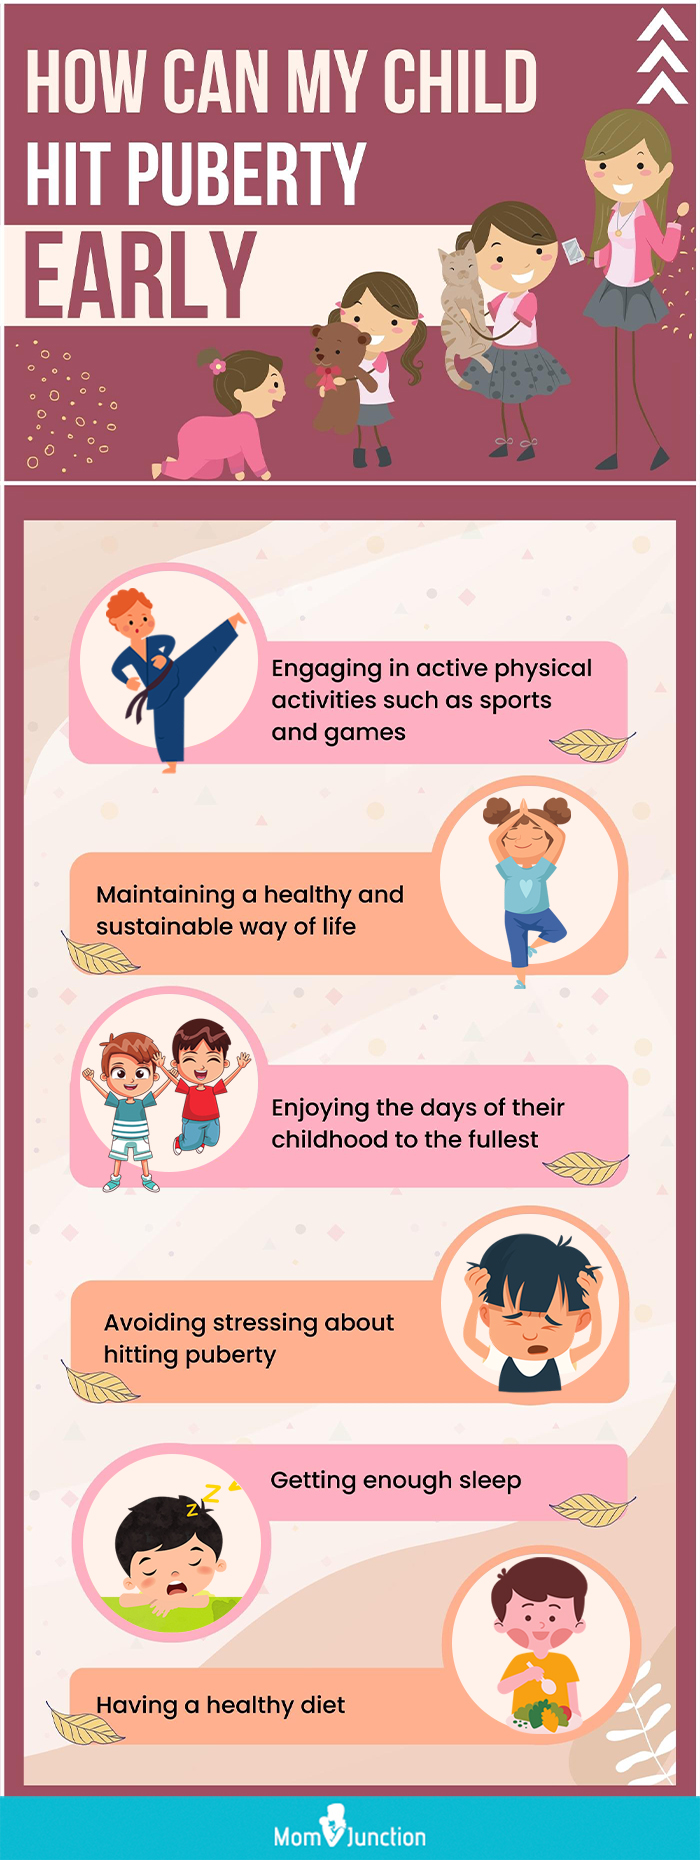 how can my child hit puberty early (infographic)